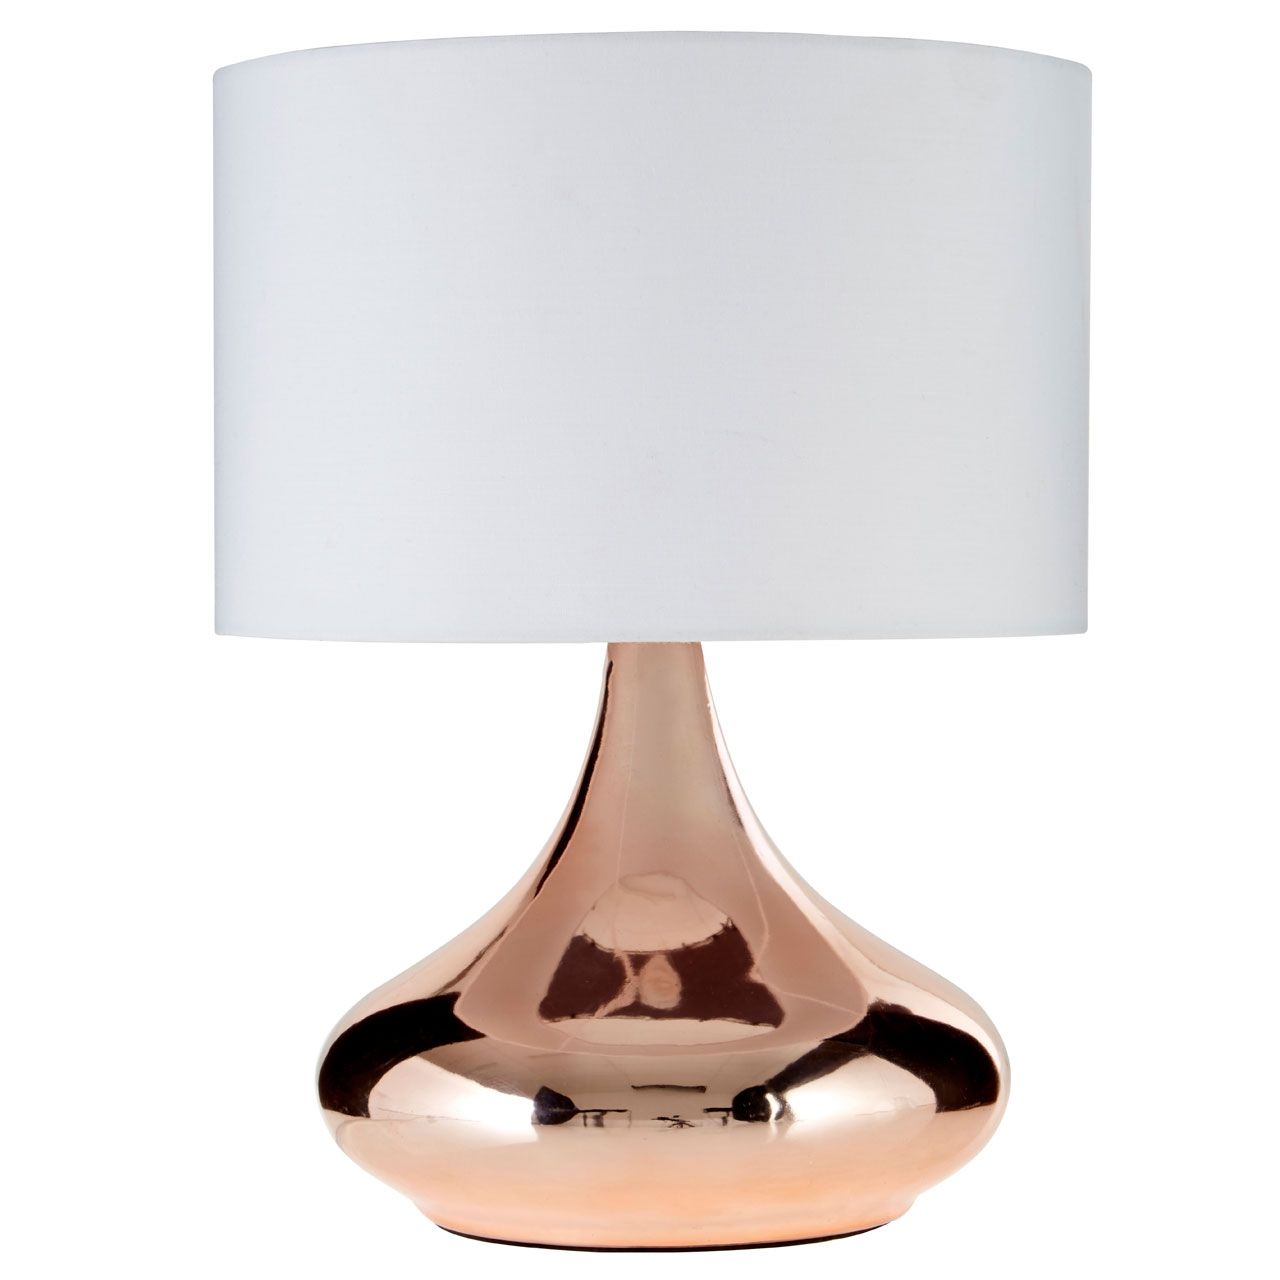 Jaden Ivory Fabric Shade Table Lamp With Copper Ceramic Base